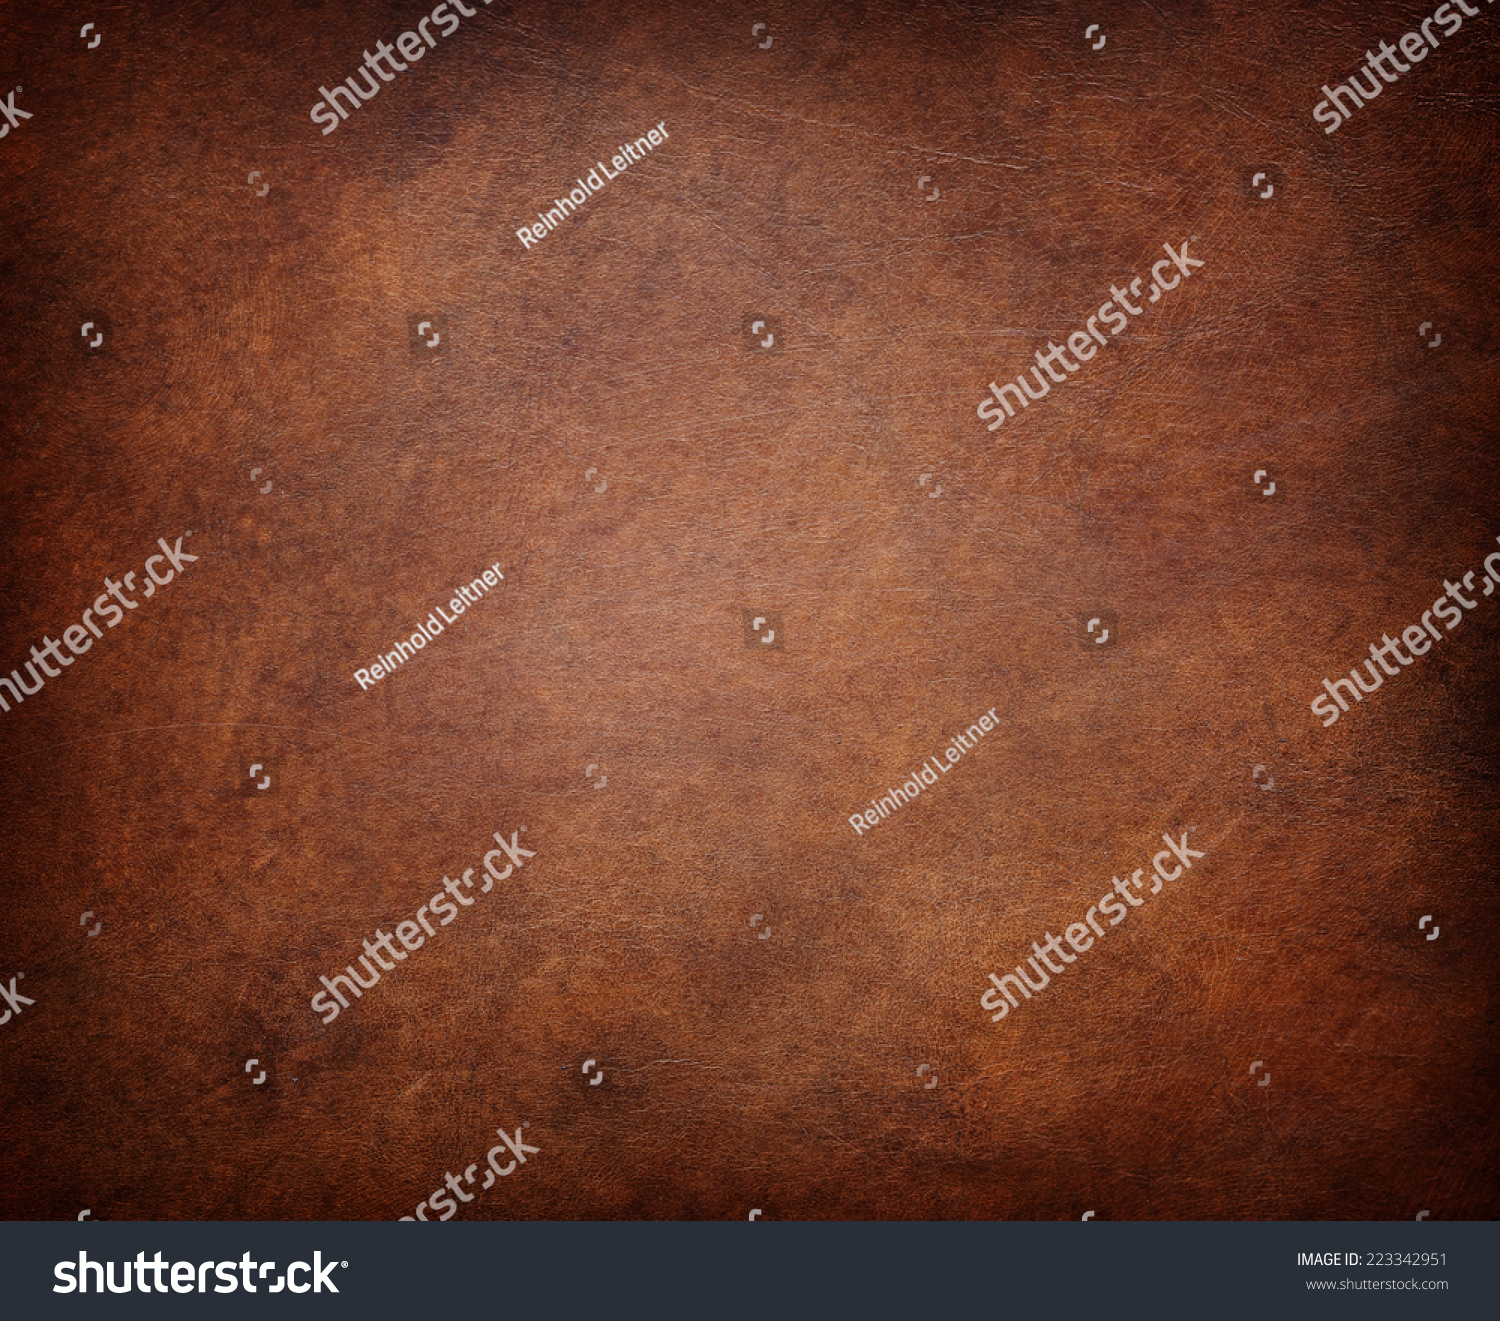 brown leather texture (may used as background). #223342951